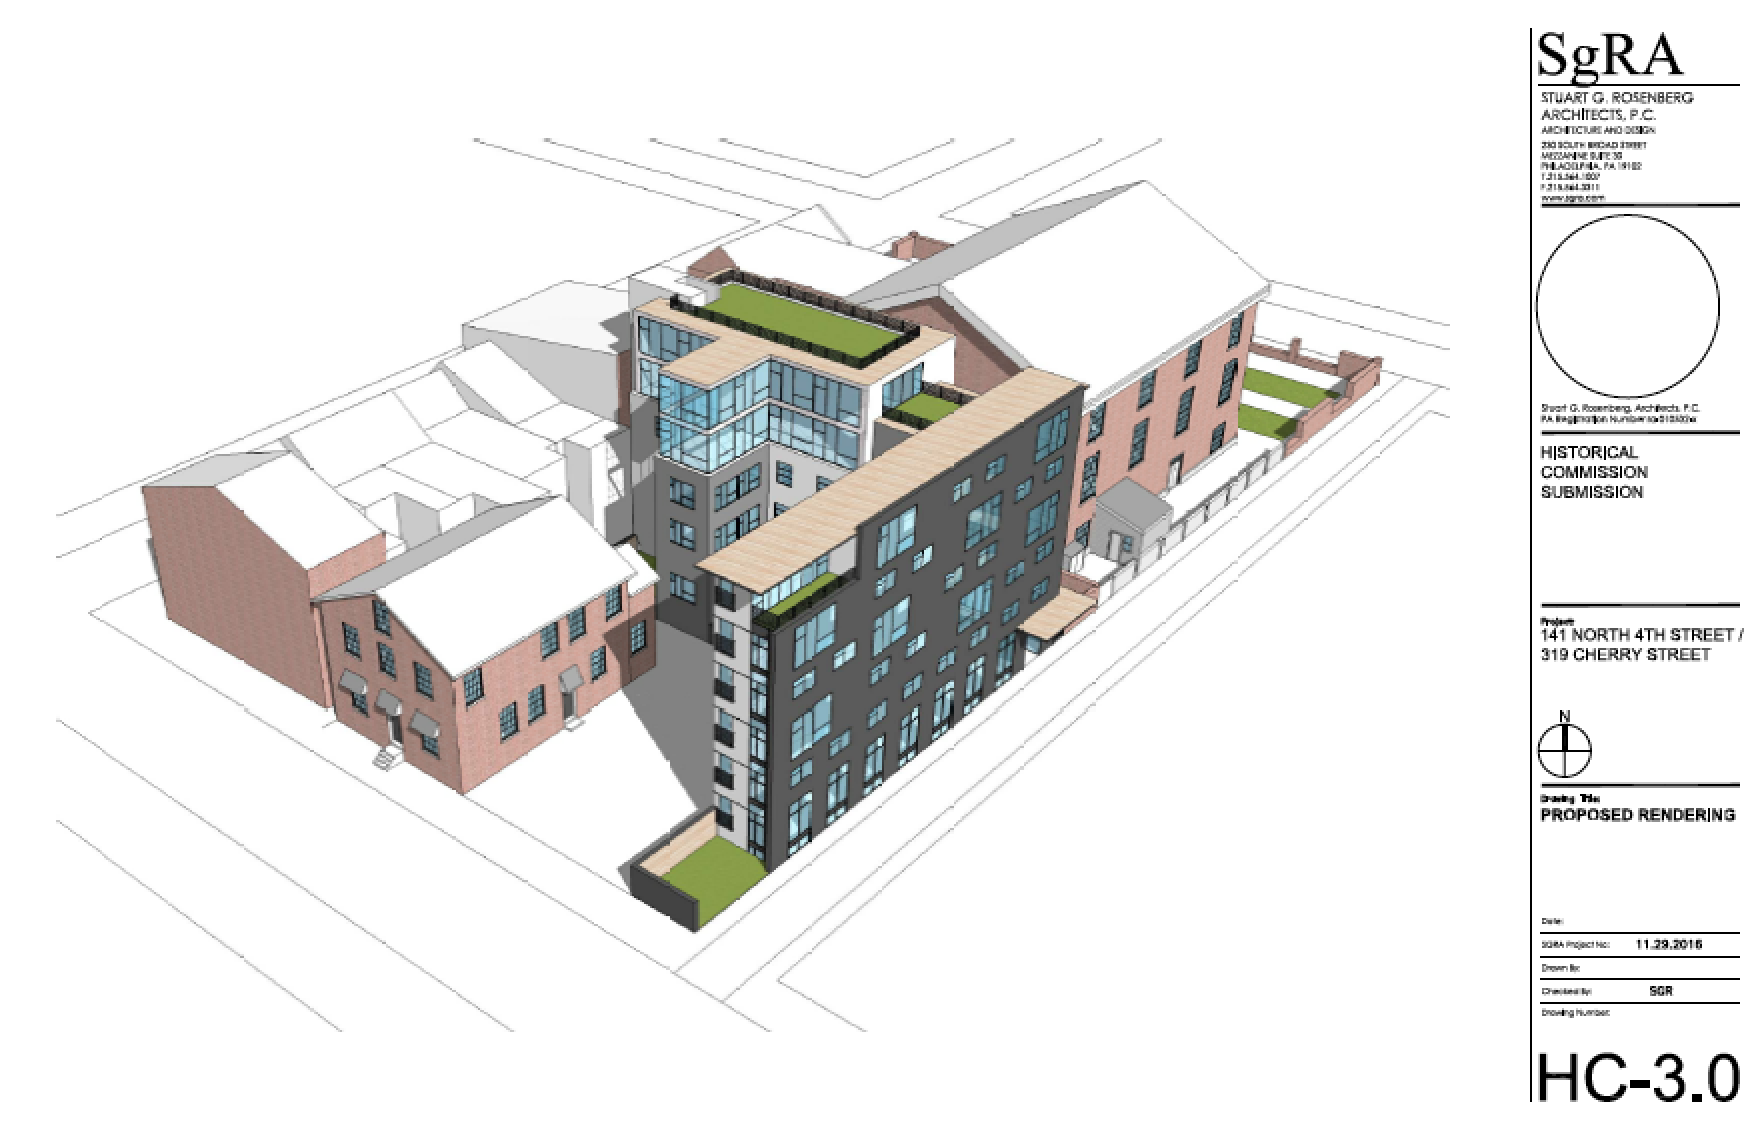 Proposal for 141 N. 4th / 319 Cherry, December 2016 Architectural Committee hearing | SgRA